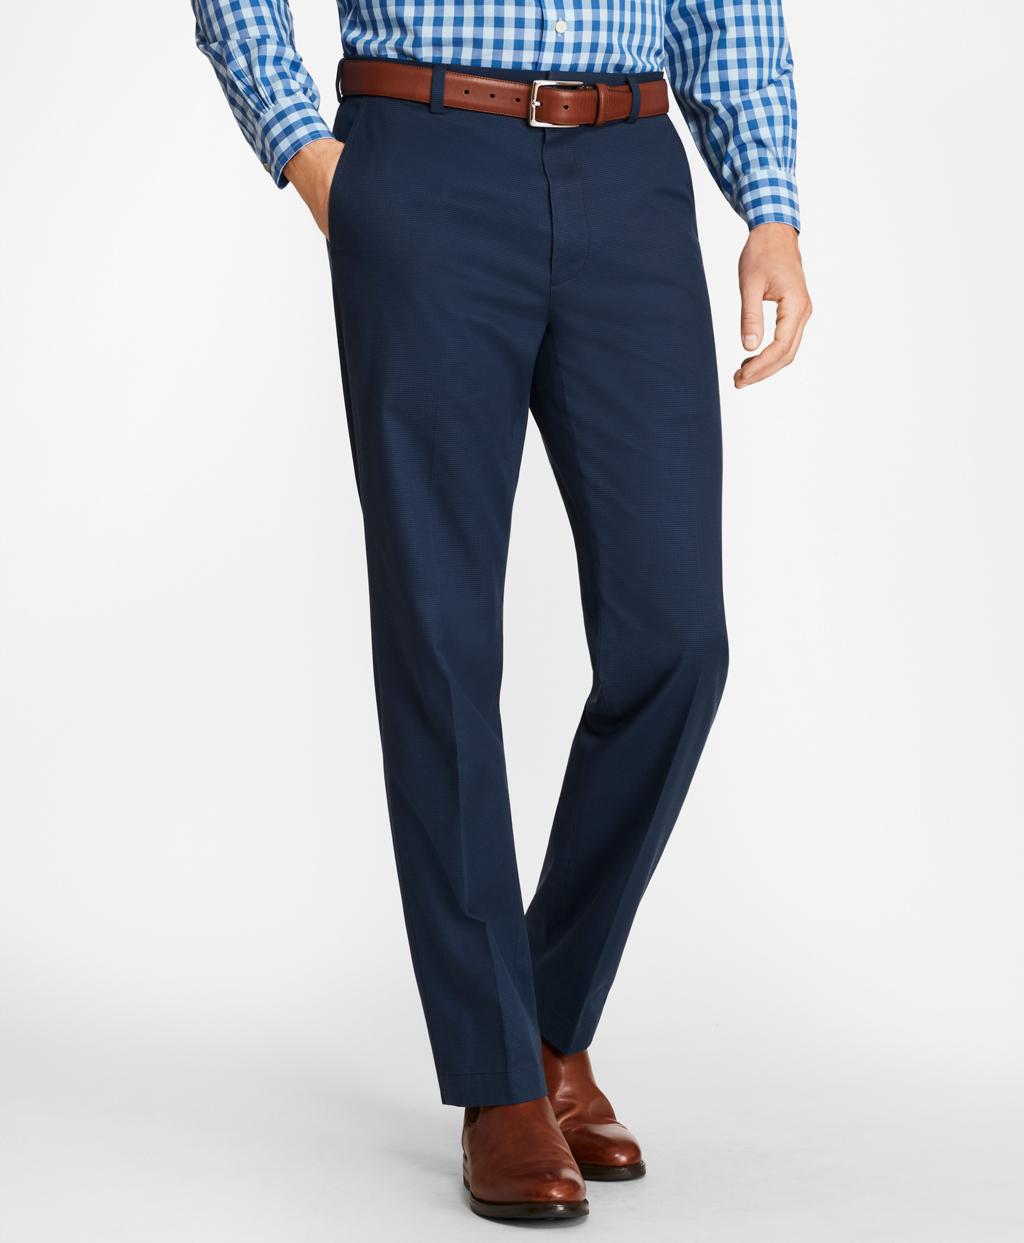 Lyst - Brooks Brothers Clark Fit Multi-check Stretch Advantage Chinos ...